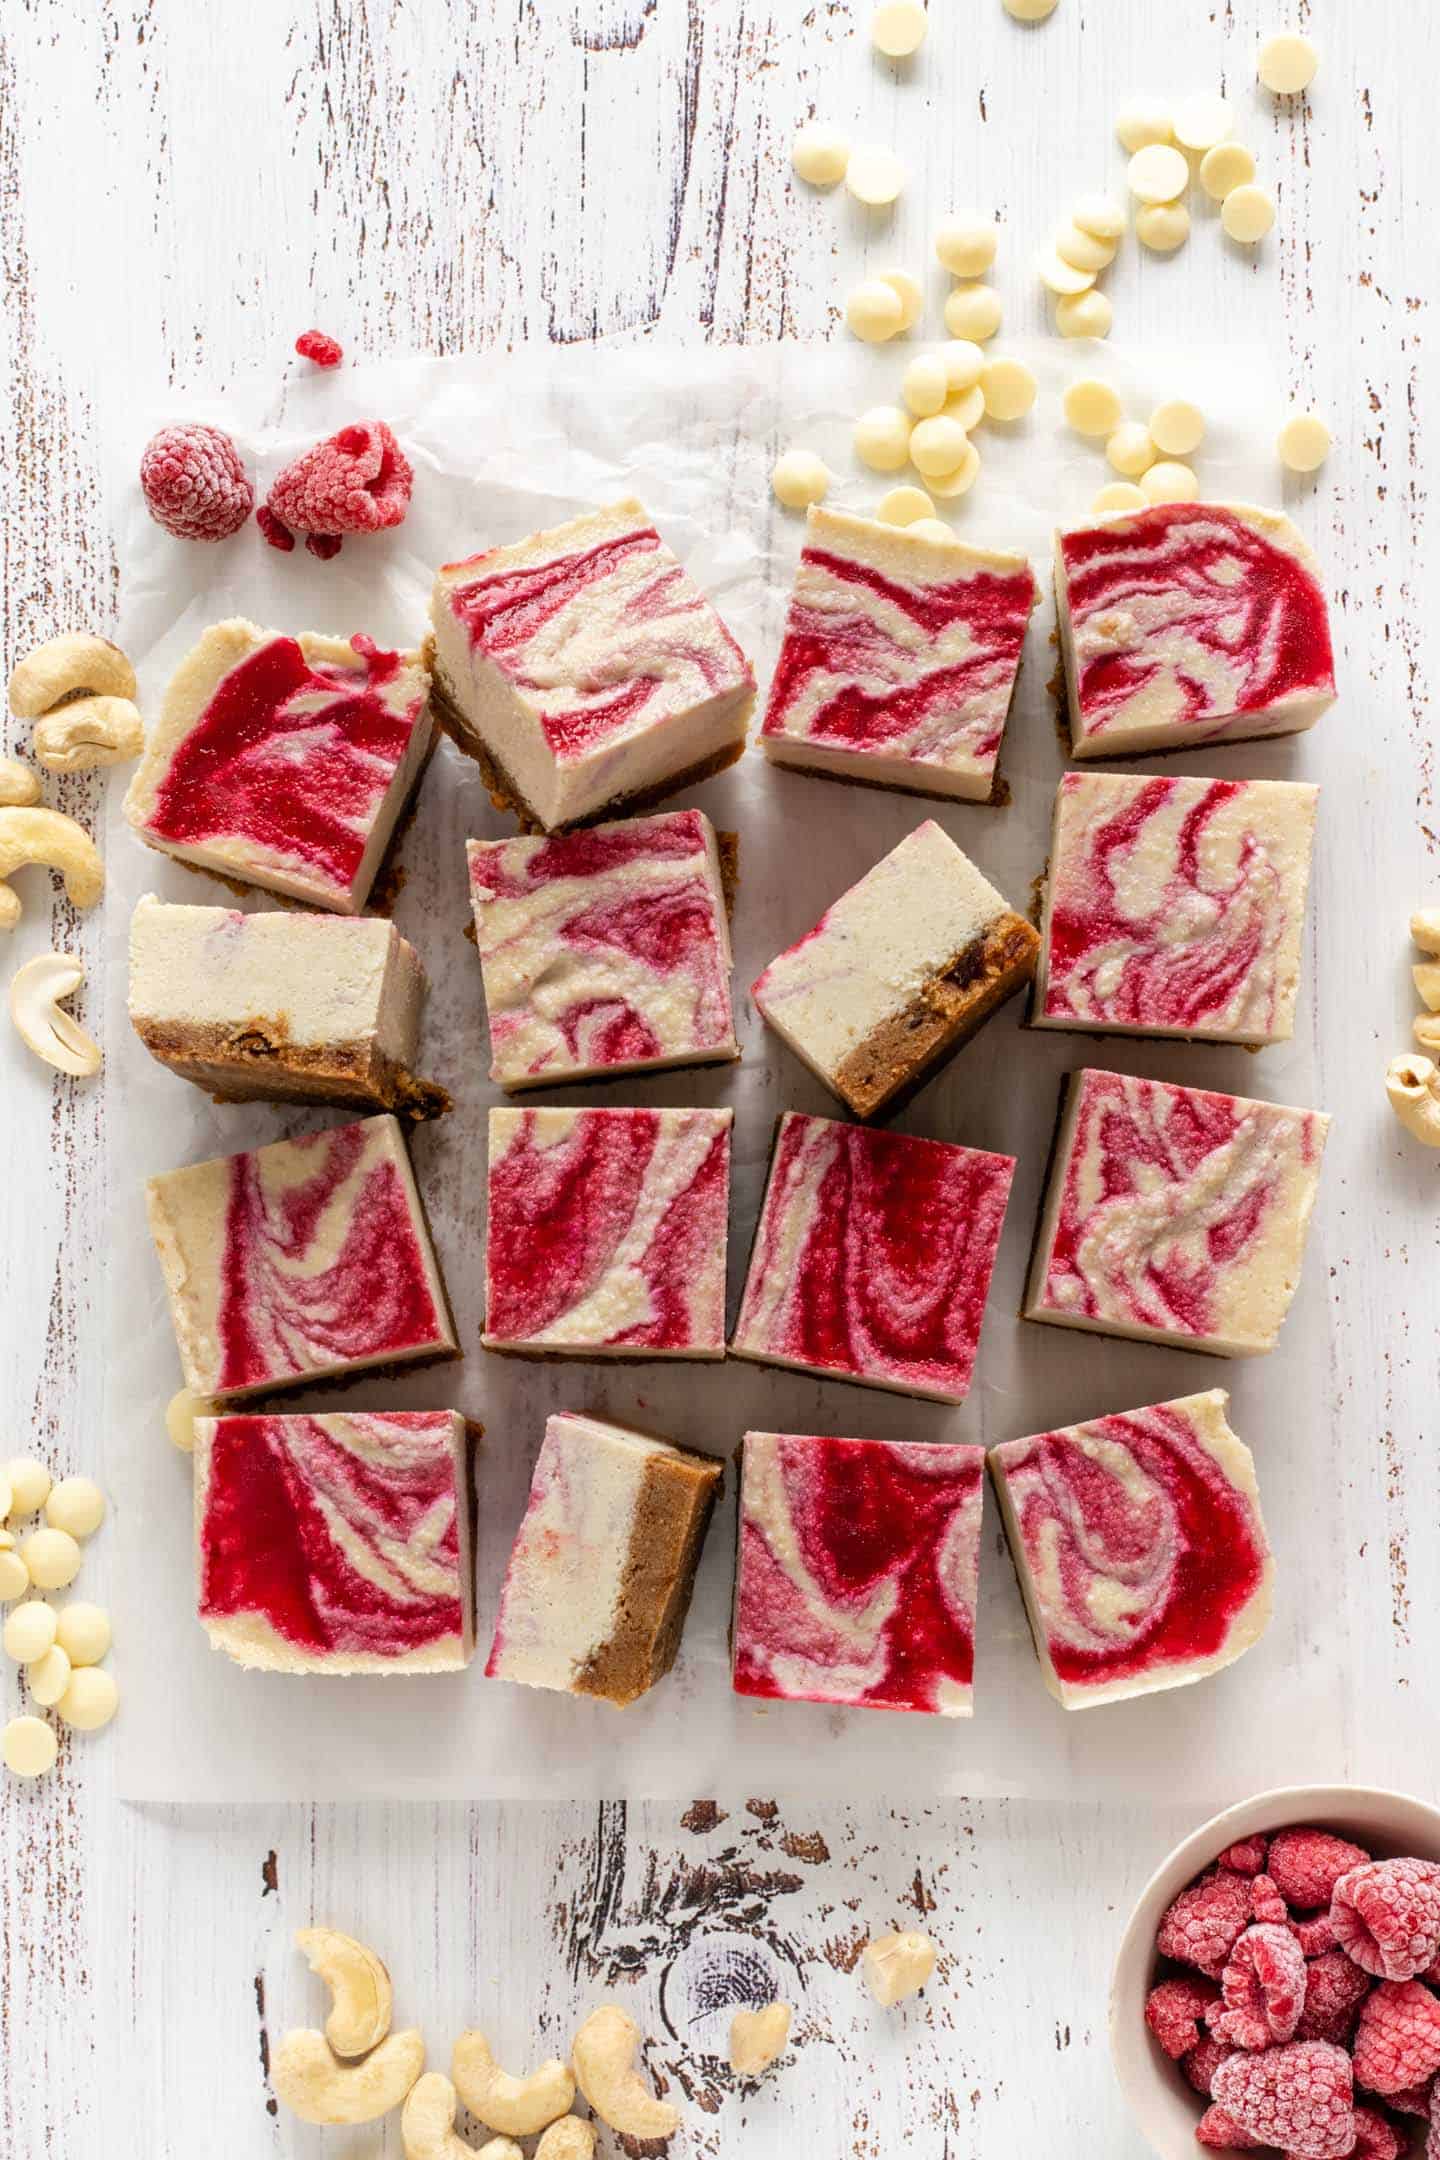 A few frozen bars on some parchment paper, a small bowl with raspberries and small white chocolate chips